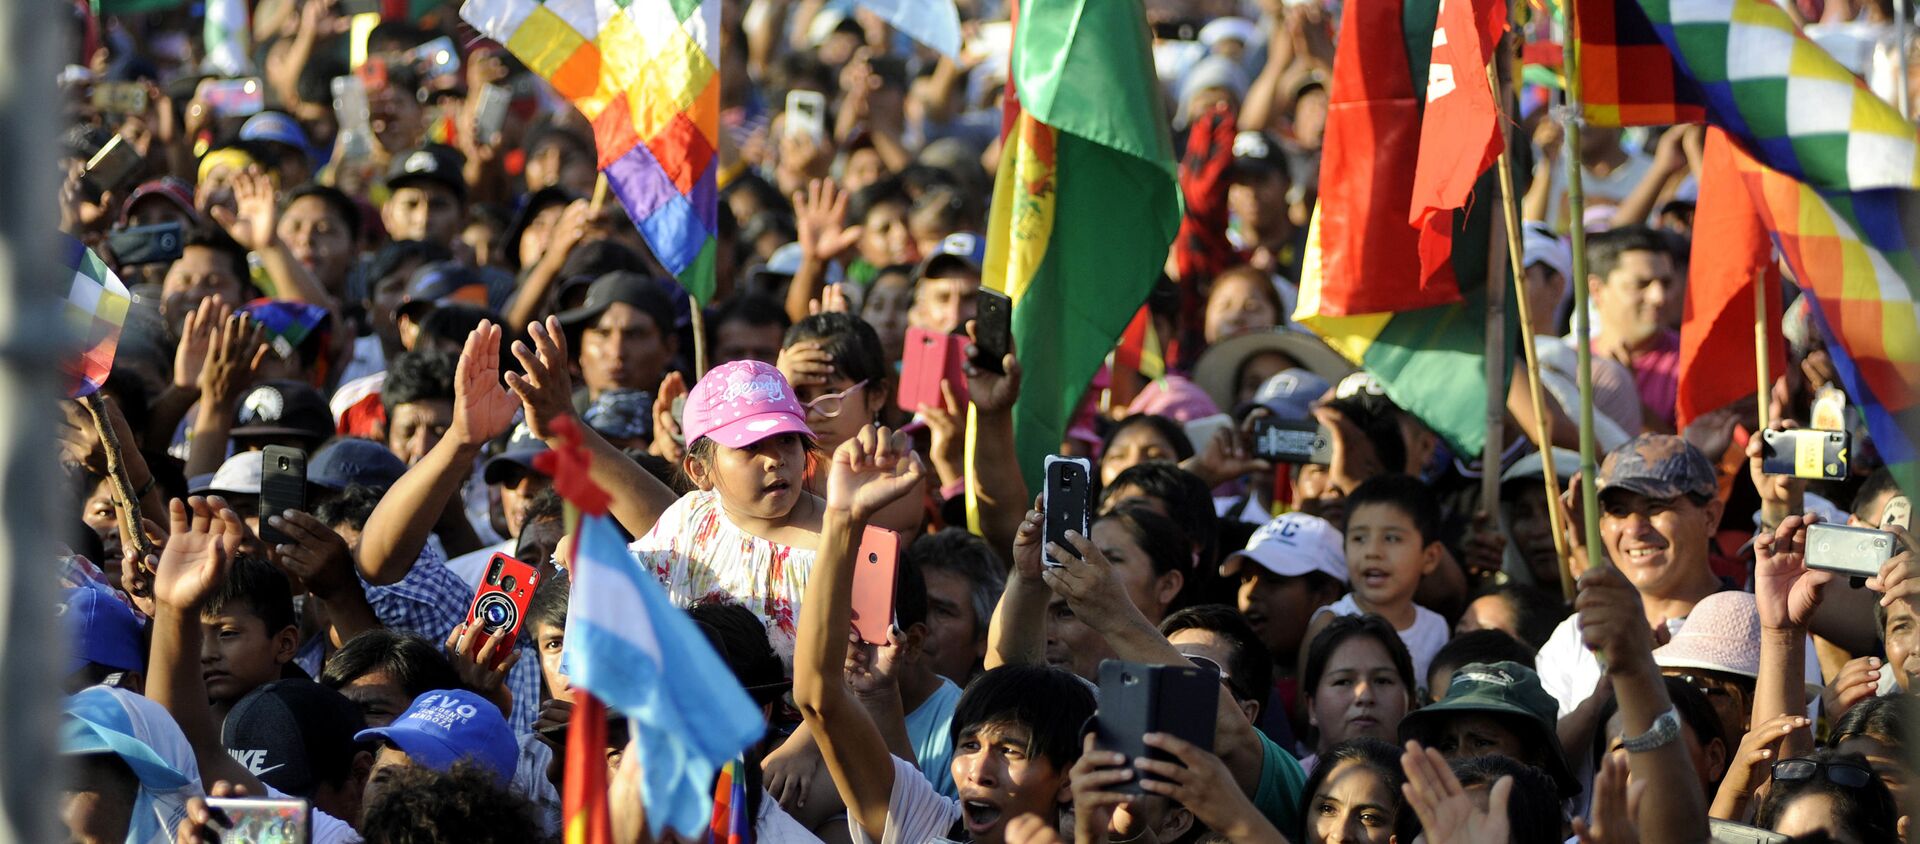 Supporters of former Bolivian President Evo Morales, exiled in Argentina, take part in a meeting organized by the Bolivianos Unidos group in Mendoza, to support the presidential candidate of the Movement to Socialism (MAS) party, Luis Arce, in Mendoza, Argentina, on March 07, 2020 - Sputnik International, 1920, 26.04.2021